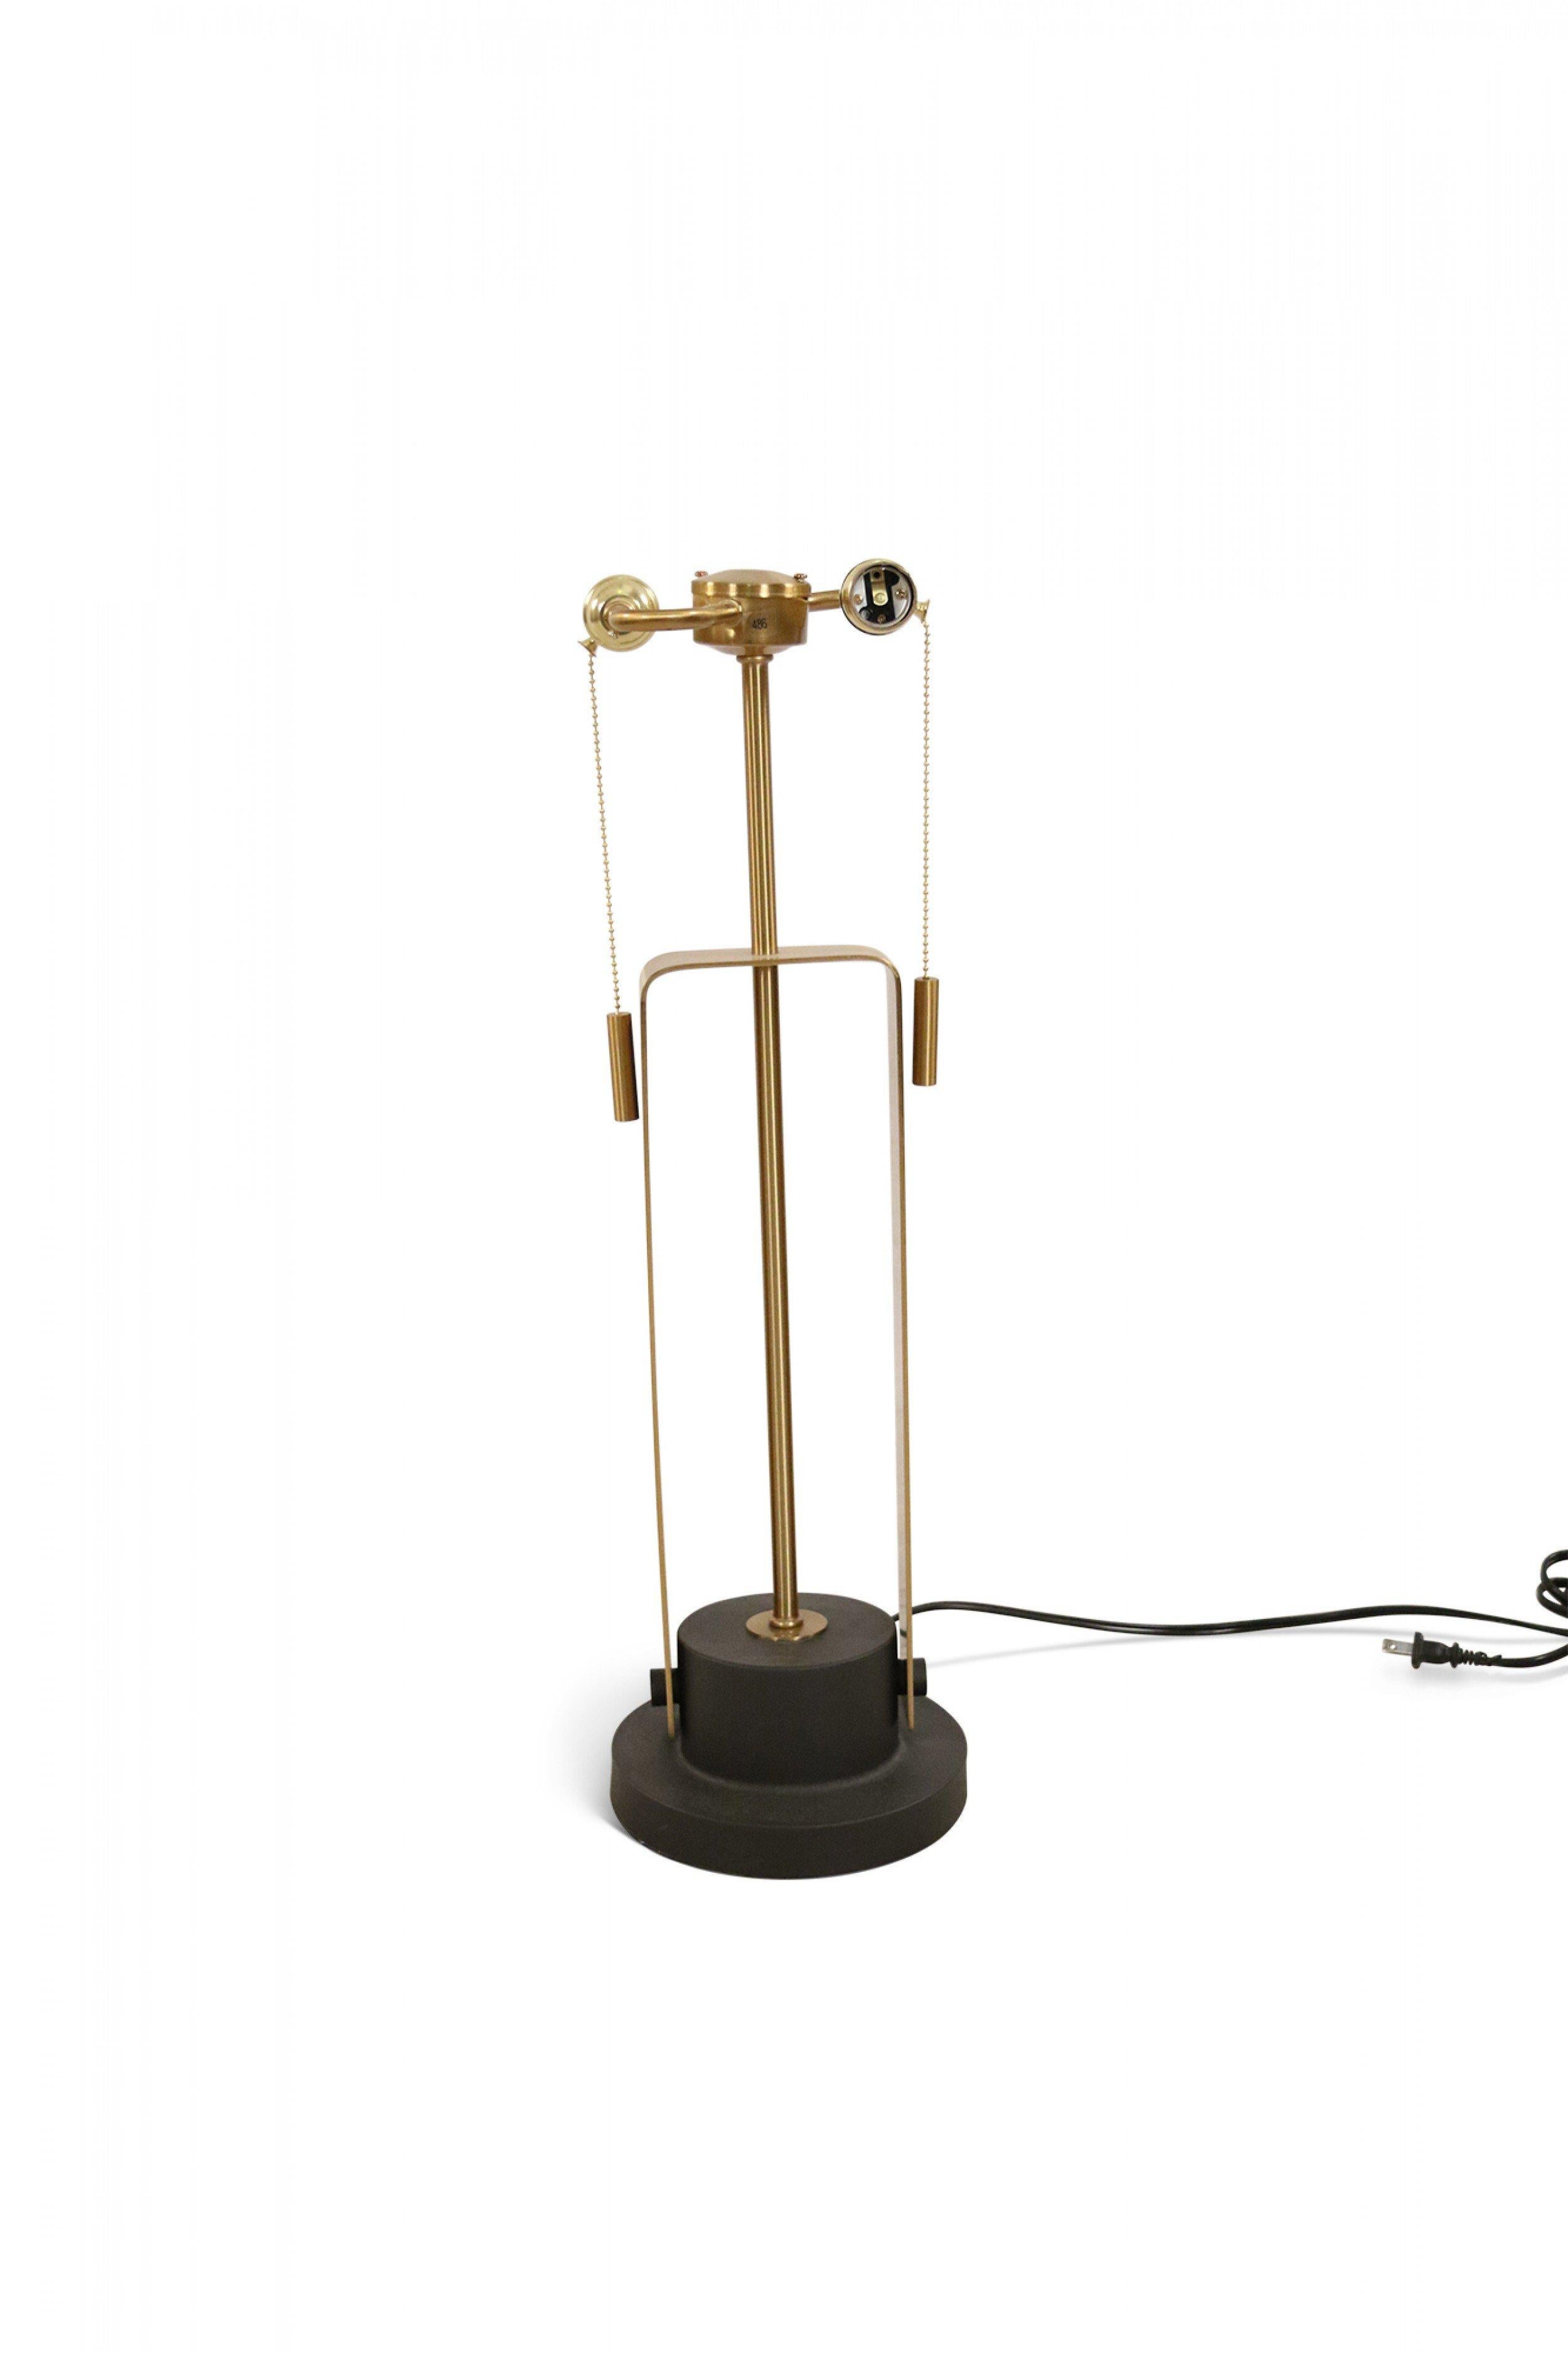 Contemporary polished brass table lamp with a beige fabric drum shade inside a geometric design brass frame on a tiered black metal base with brass supports.